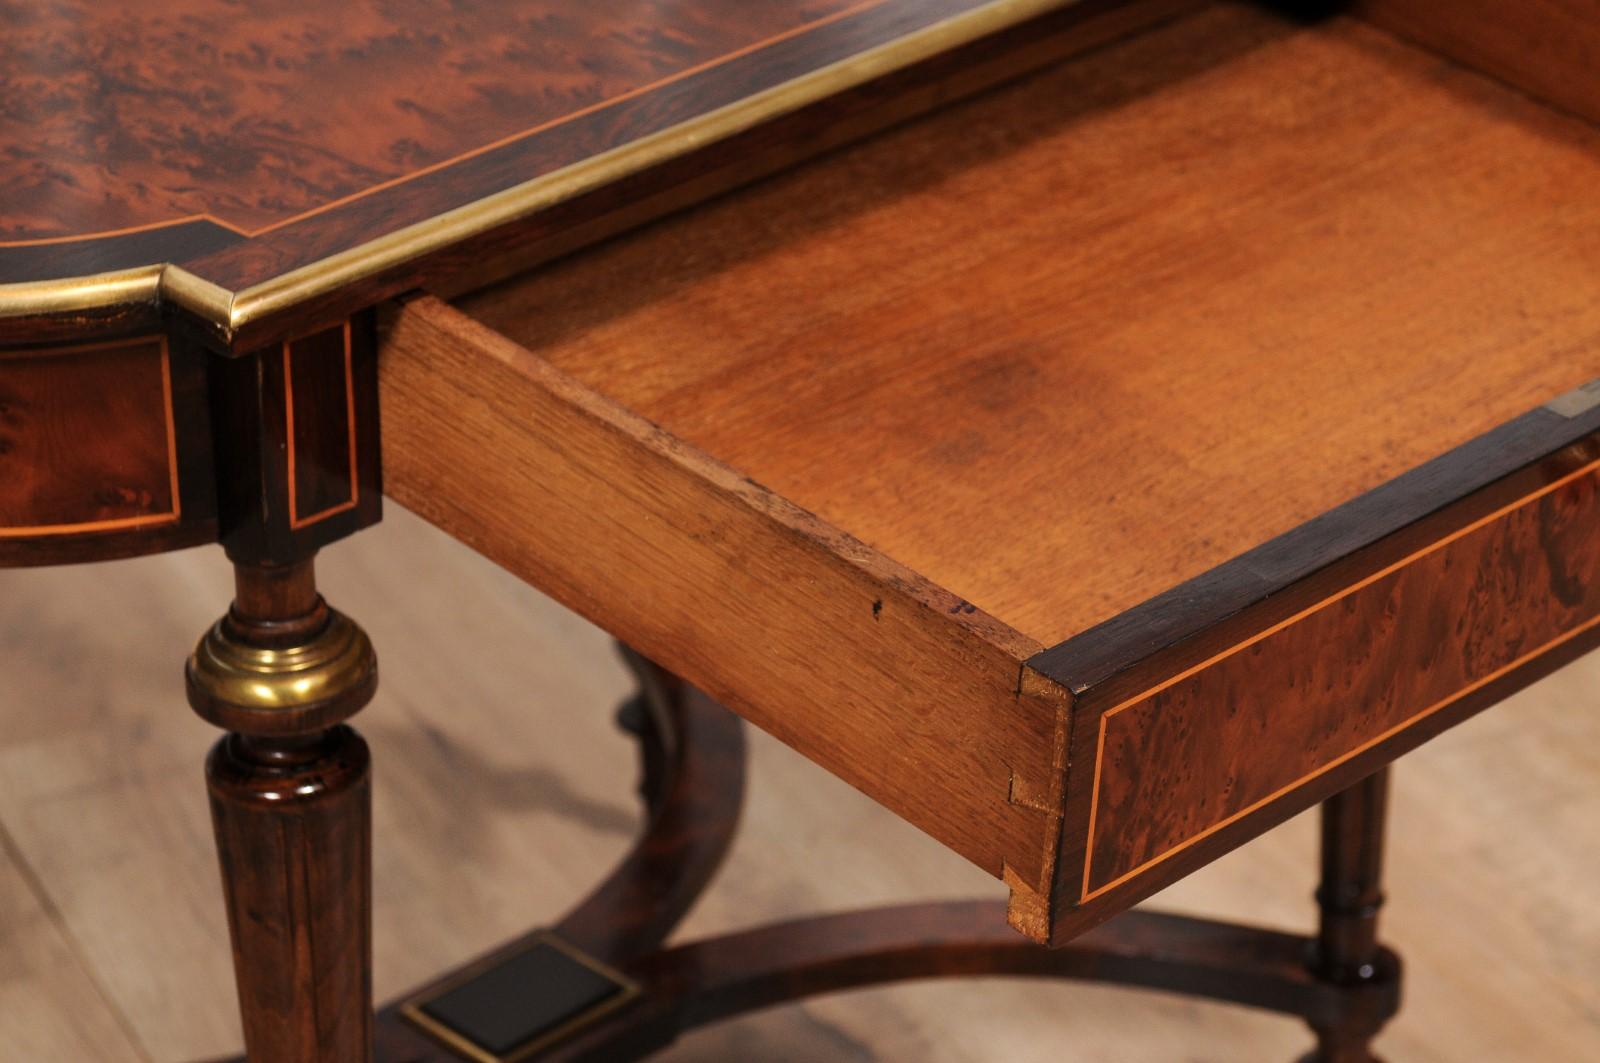 Italian 1890s Walnut, Mahogany and Brass Side Table with Floral Marquetry Décor For Sale 2